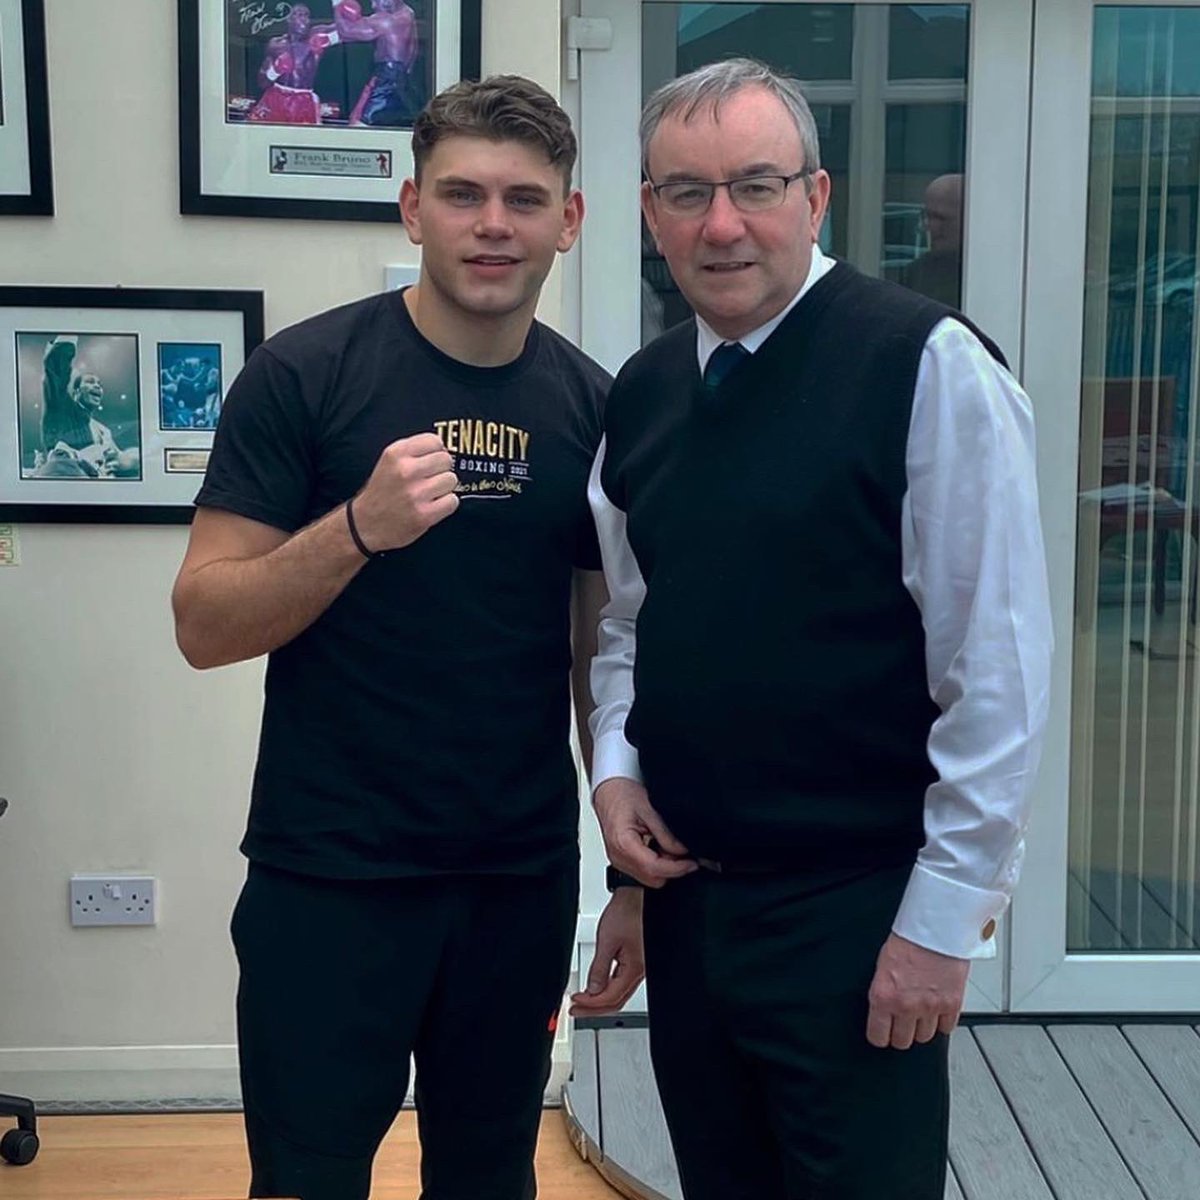 I’m delighted to announce I’ve signed a professional contract under the management of @SteveWoodVIP @vipboxing 🖋 Excited for what’s to come with the best team possible around me @BoxingTenacity @Johnstubbsy84 @anthonykellybox 👌 Fight news coming soon 👀 🥊